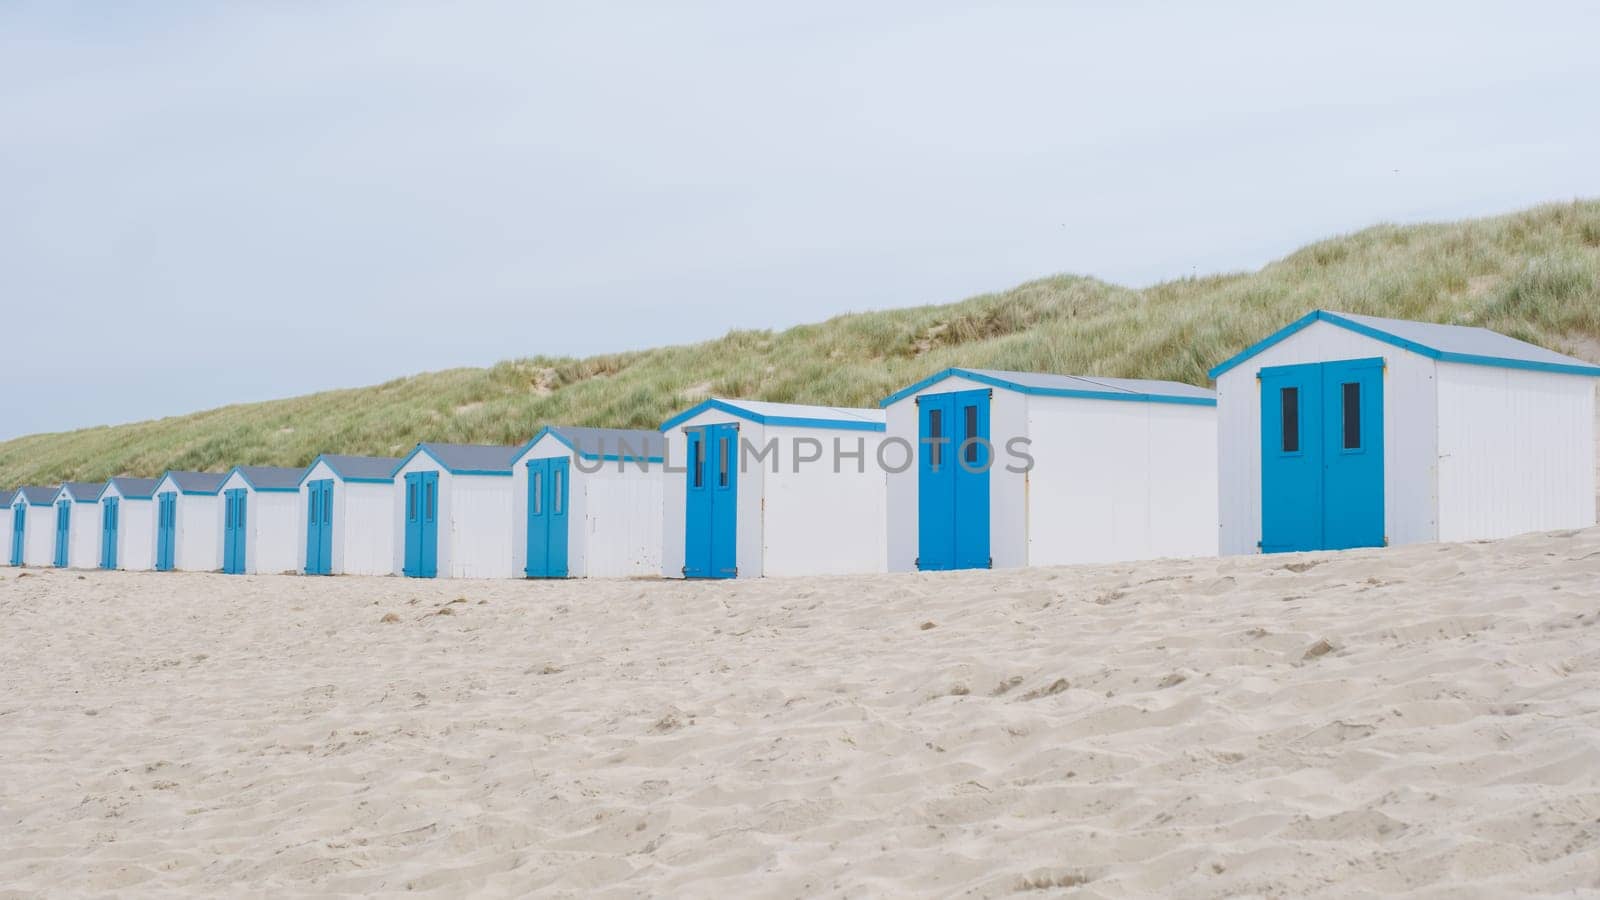 A charming row of beach huts with vibrant blue doors standing on the sandy shores of Texel, creating a picturesque scene against the backdrop of the sea.